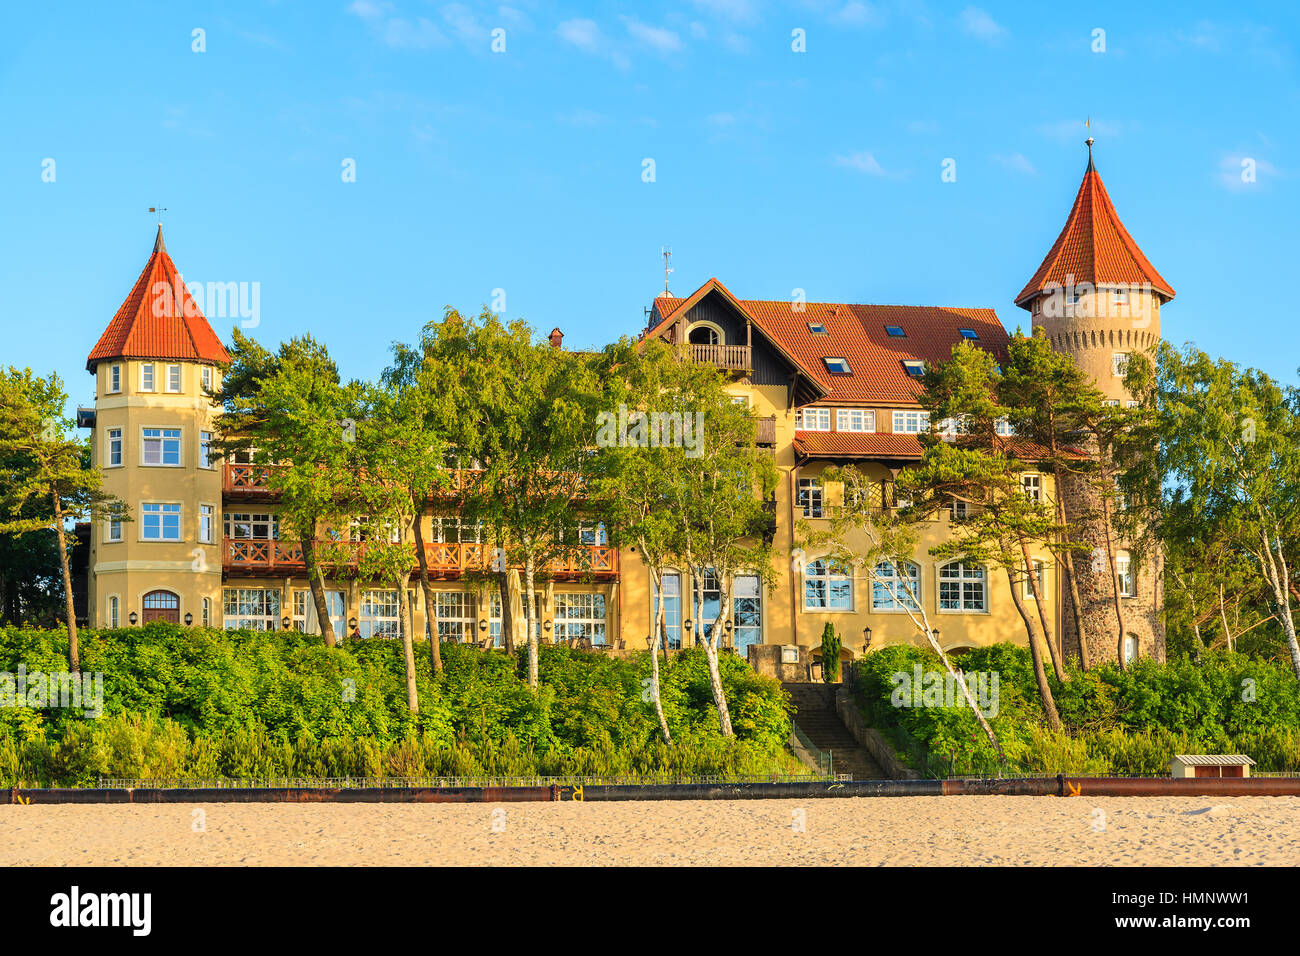 A view of Leba beach and historic hotel building on sand dune, Baltic Sea, Poland Stock Photo